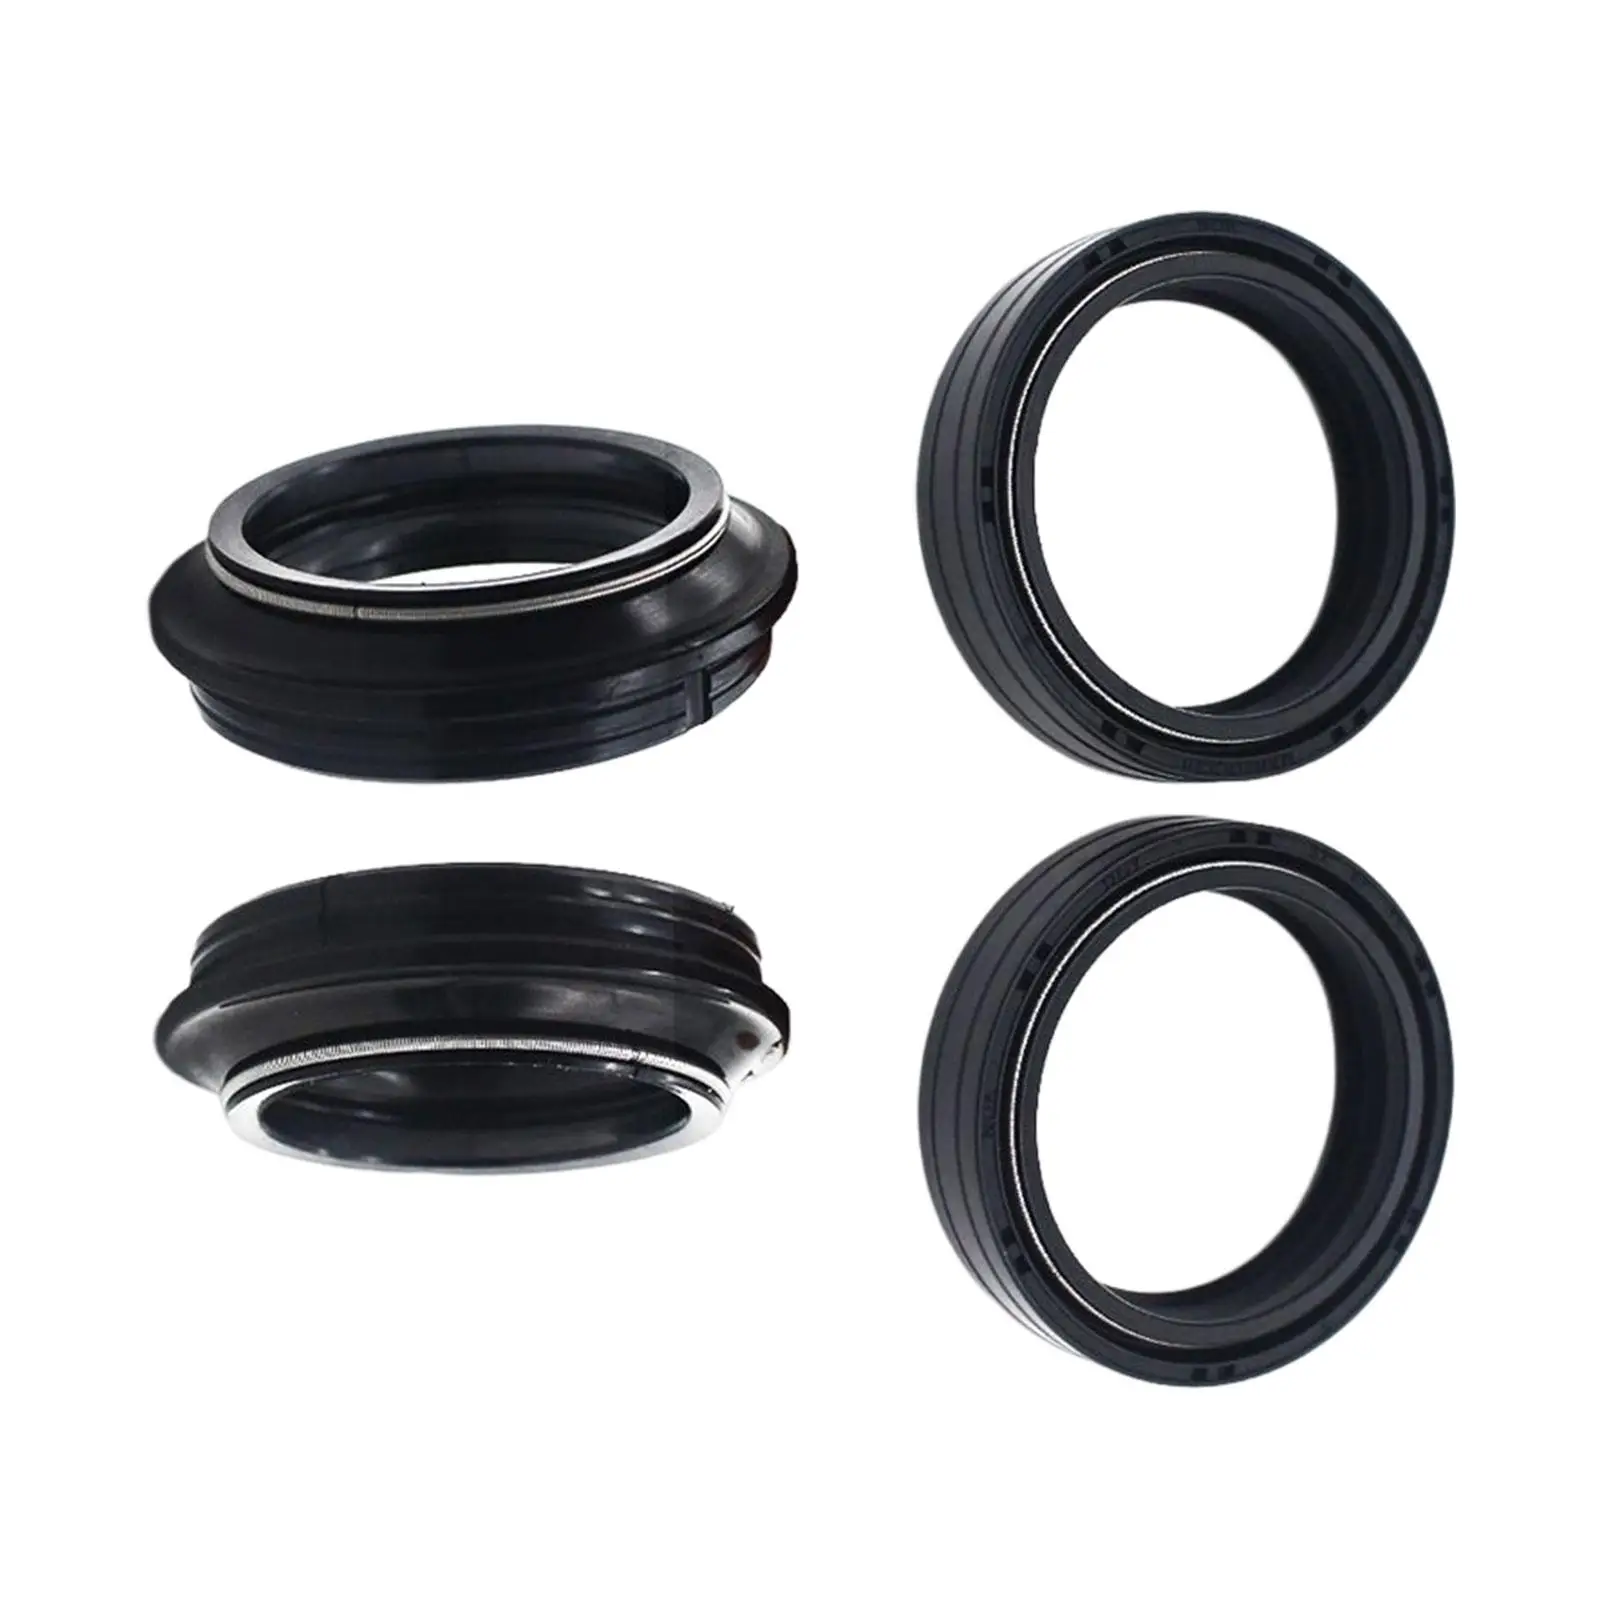 Front Fork Shock Oil Seal and Dust Seal Set Rubber Accessory for BMW R1200GS